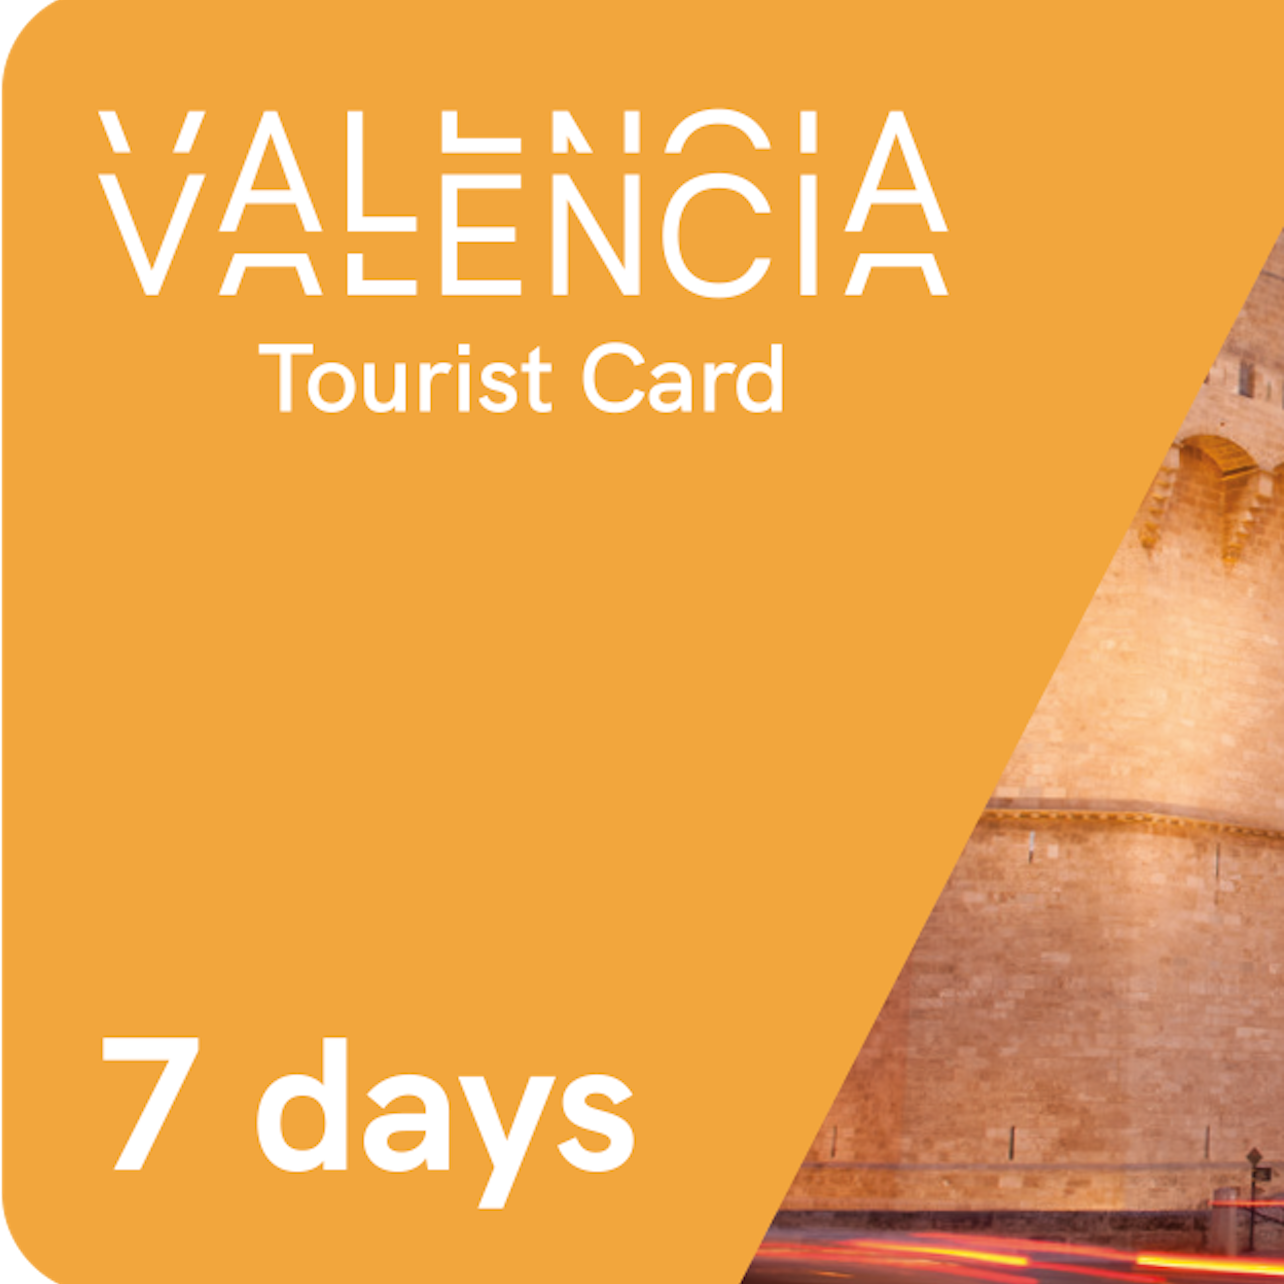 Valencia Tourist Card 7 Days (transport not included) - Accommodations in Valencia